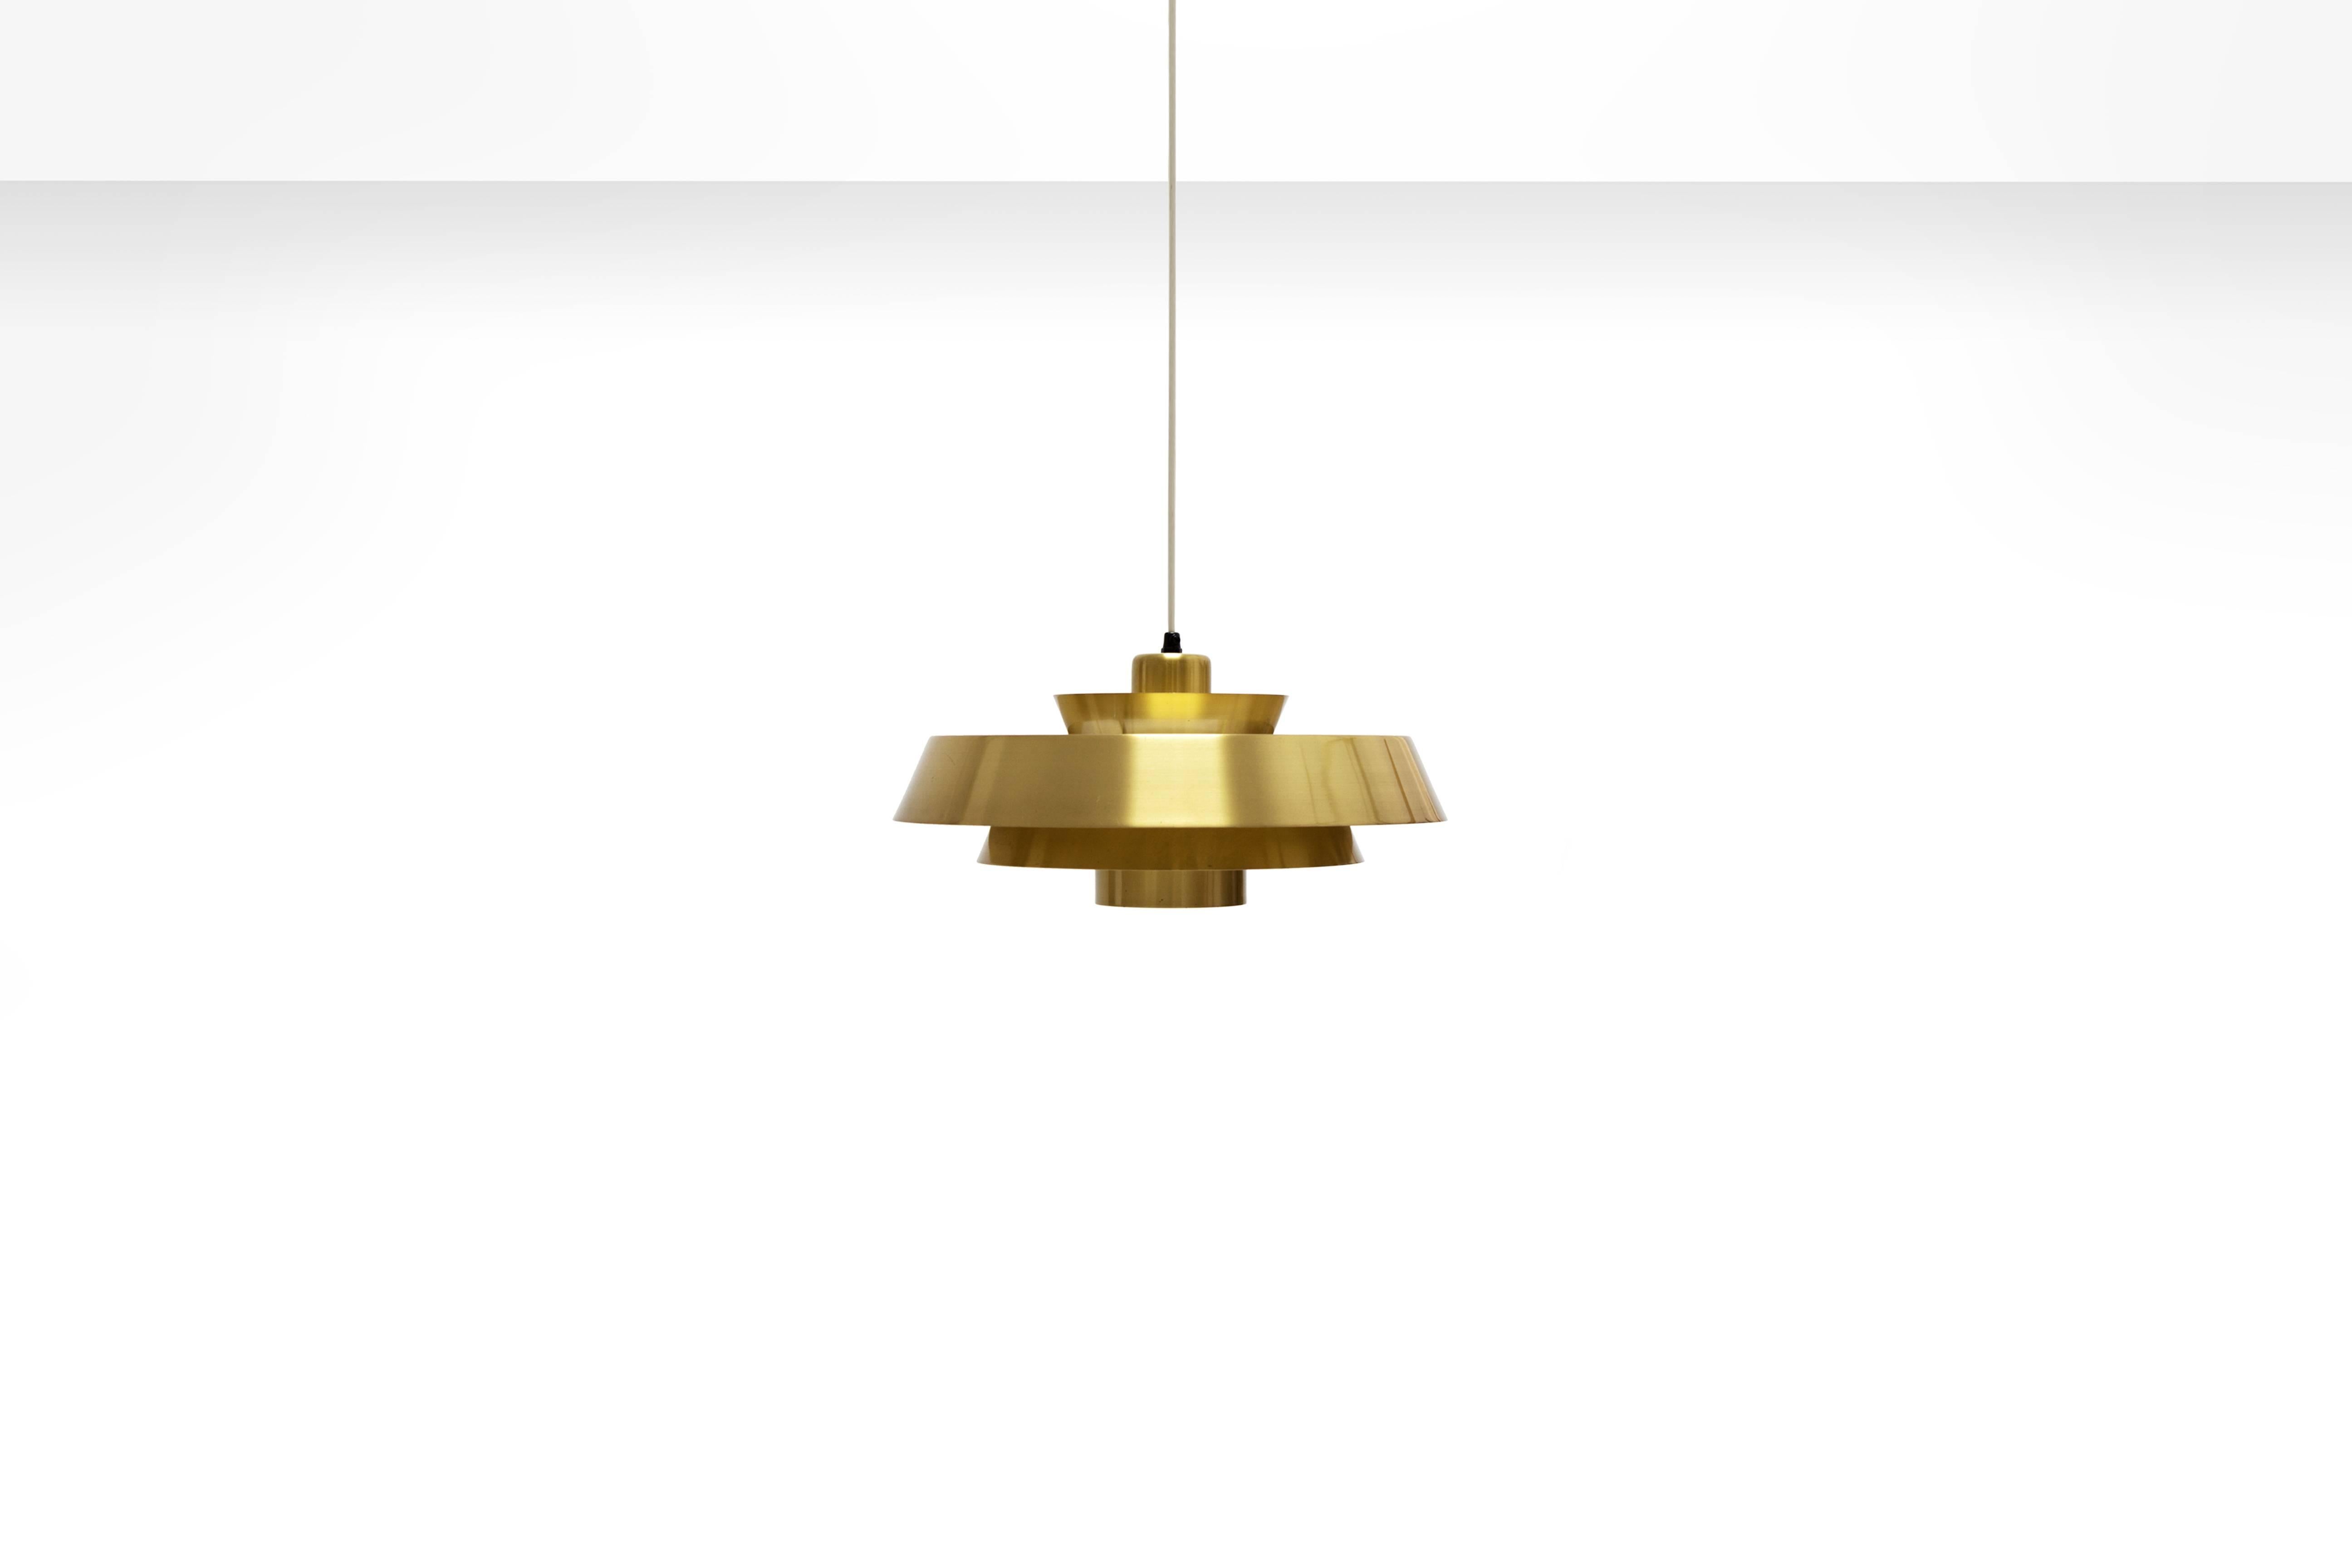 Jo Hammerborg Nova pendant light in brass for Fog & Mørup, Denmark, 1960s

Items are in good condition.

WORLDWIDE SHIPPING
We offer tailor made solutions for the shipping of your items; first class white glove shipping, parcel and door-to-door